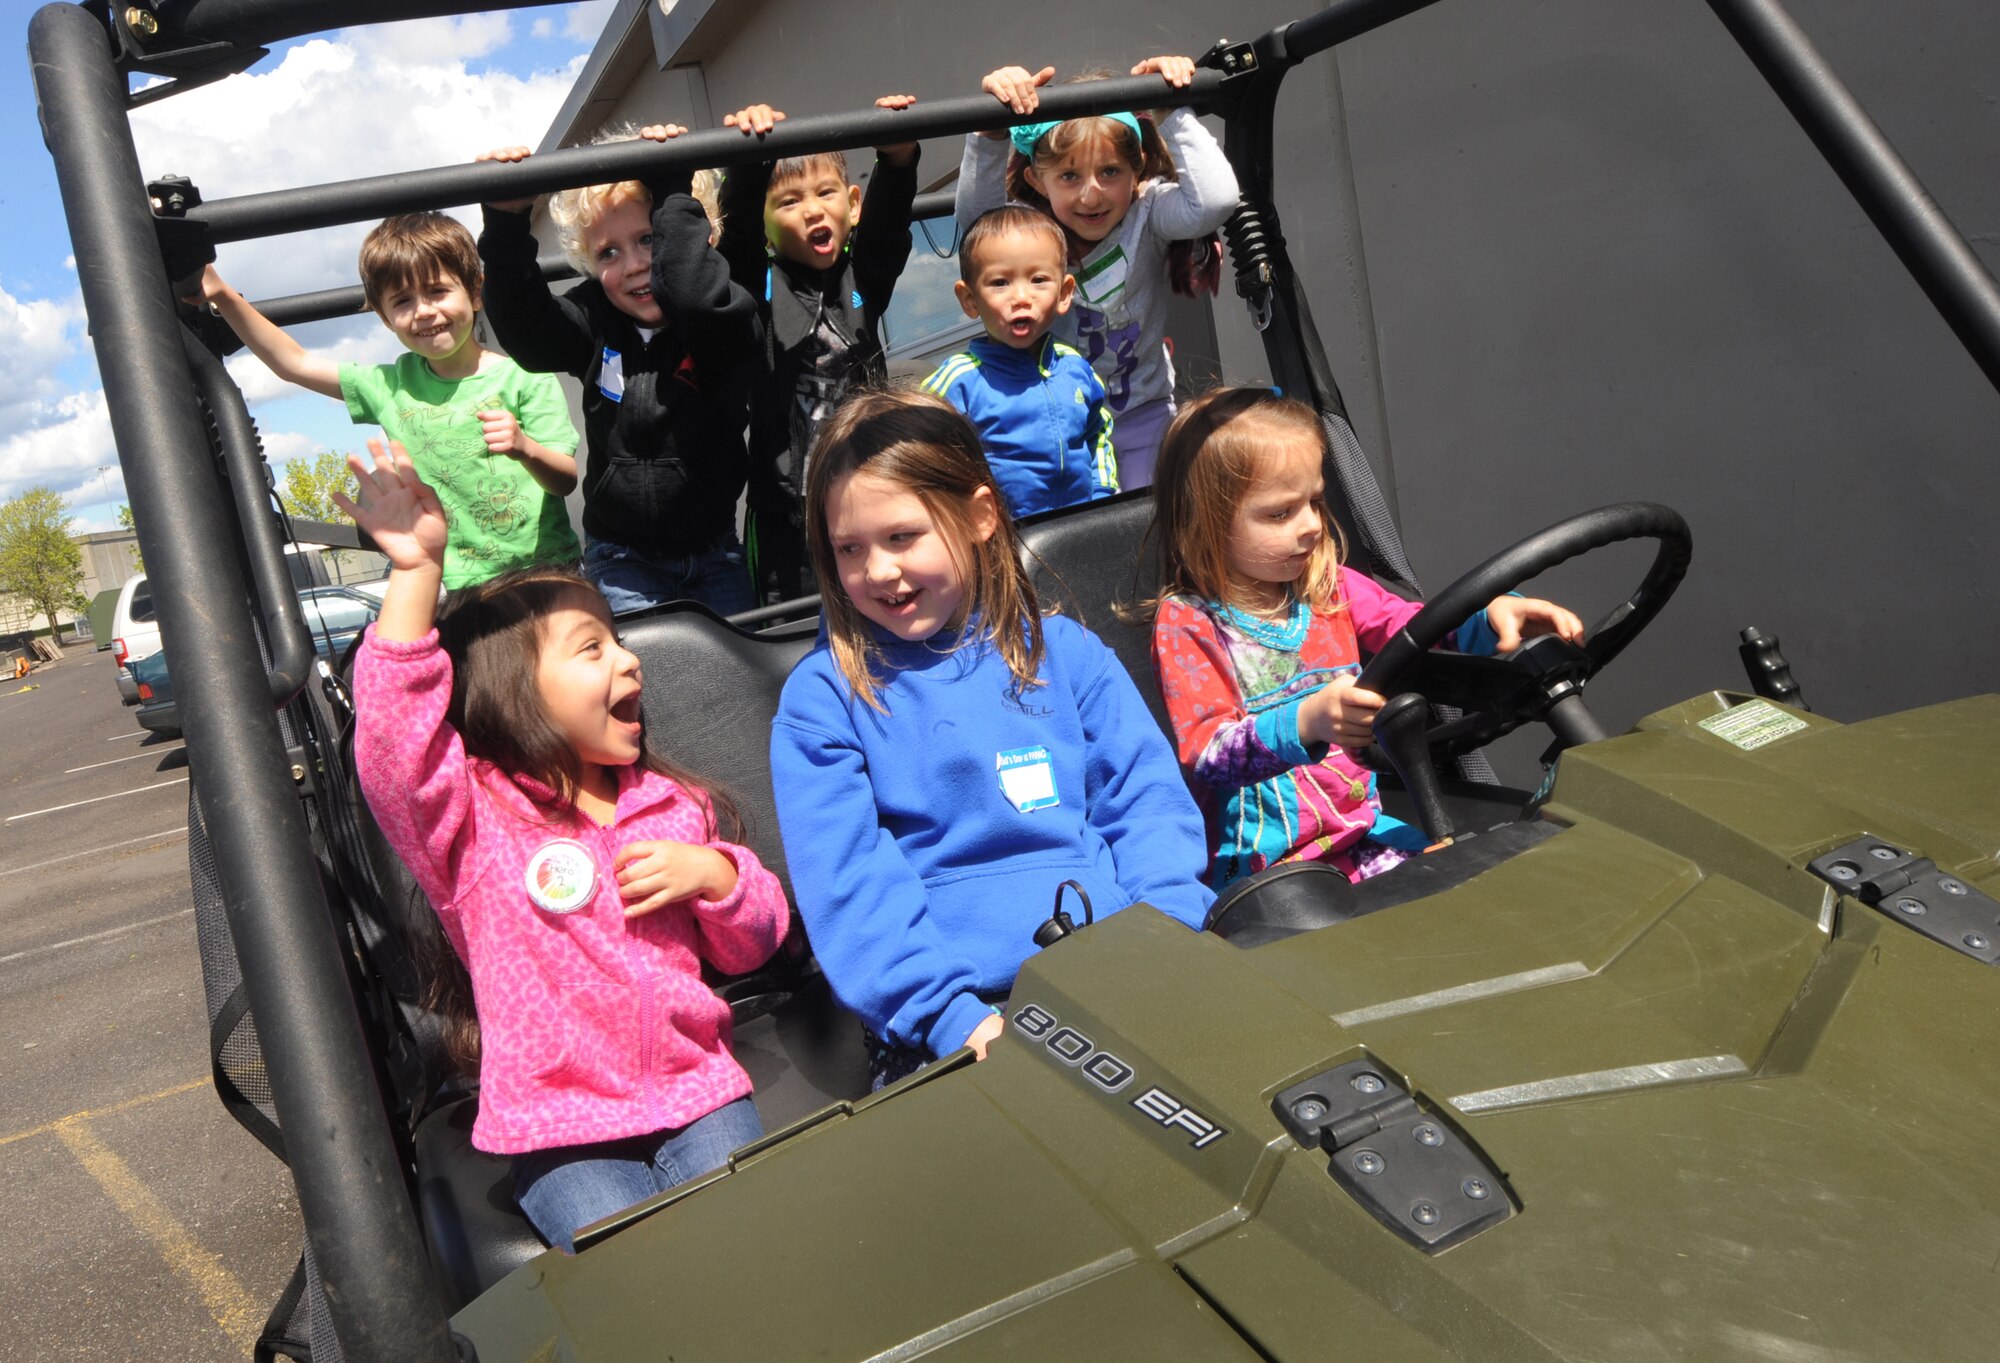 A group of kids attending ‘Kids Day at PANG’ play inside one of the many vehicles used my military personnel at the Portland Air National Guard Base, Ore., April 25, 2015. The Oregon National Guard opened the Portland Air Base to children of military members for a special day of activities highlighting “The Month of the Military Child,” designated since 1986 by the Department of Defense as way to recognize the contribution and personal sacrifices children make to the military. (U.S. Air National Guard photo by Tech. Sgt. John Hughel, 142nd Fighter Wing Public Affairs/Released)